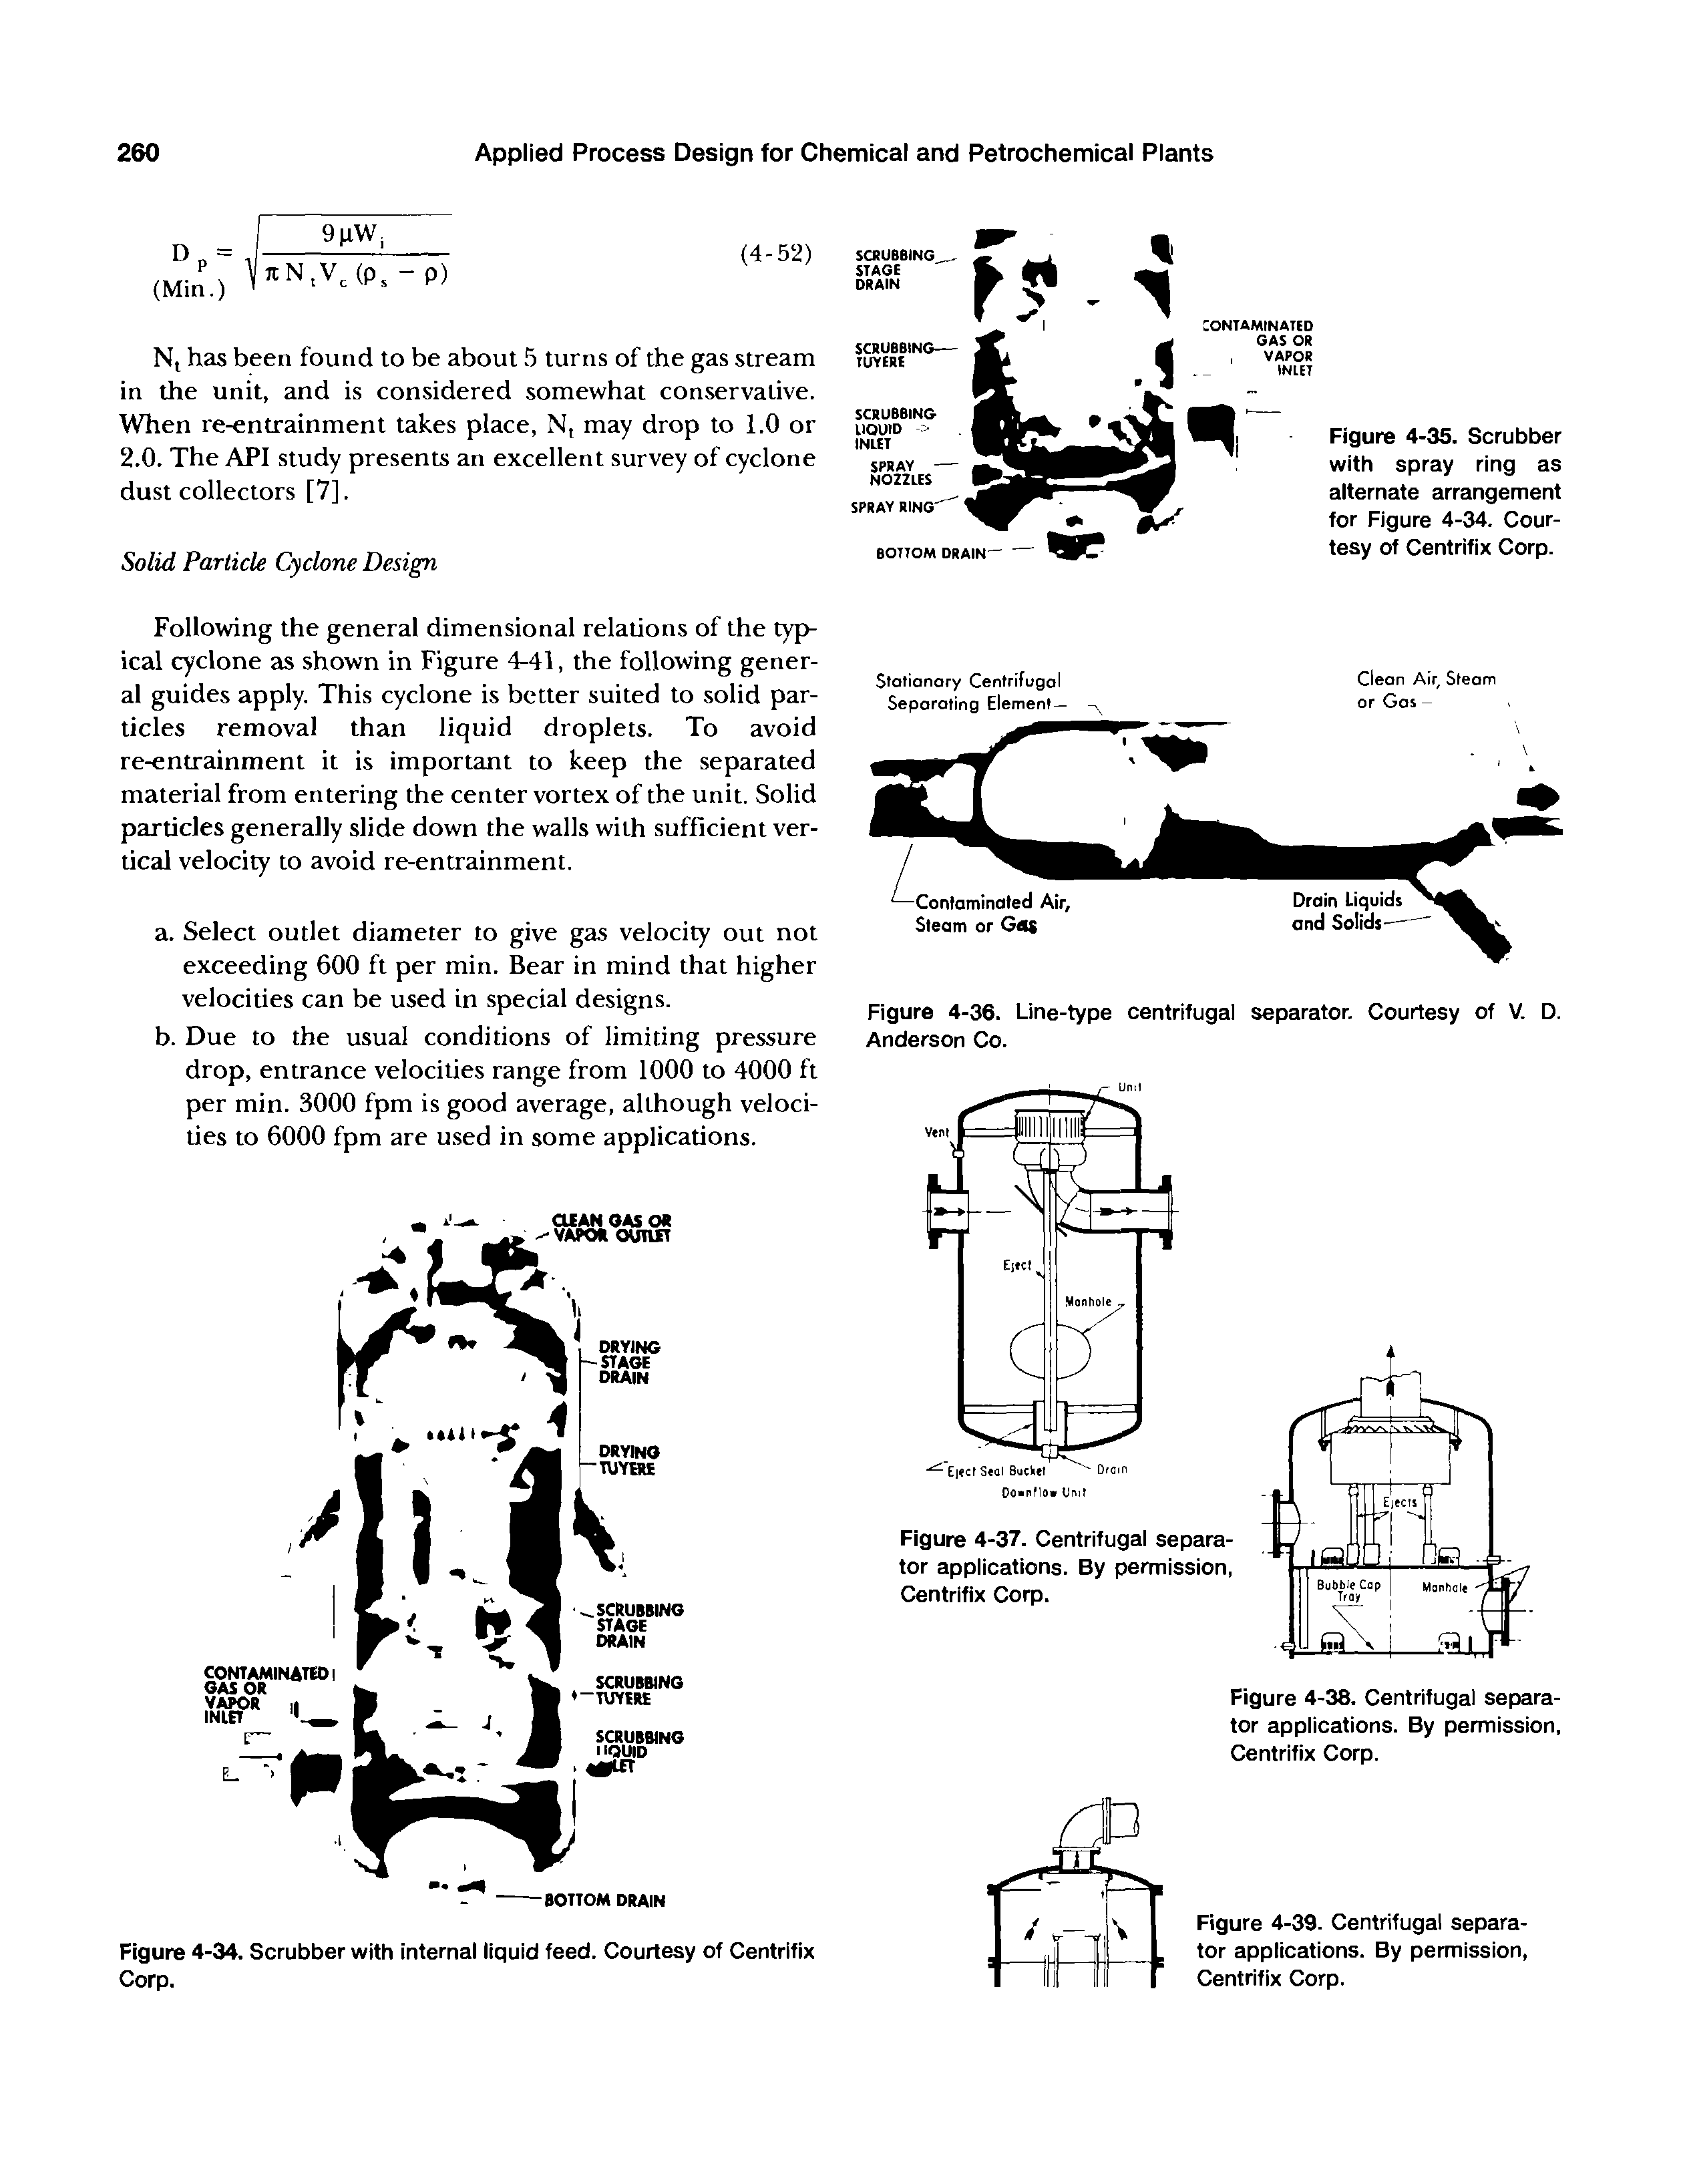 Figure 4-36. Line-type centrifugal separator. Courtesy of V. D. Anderson Co.